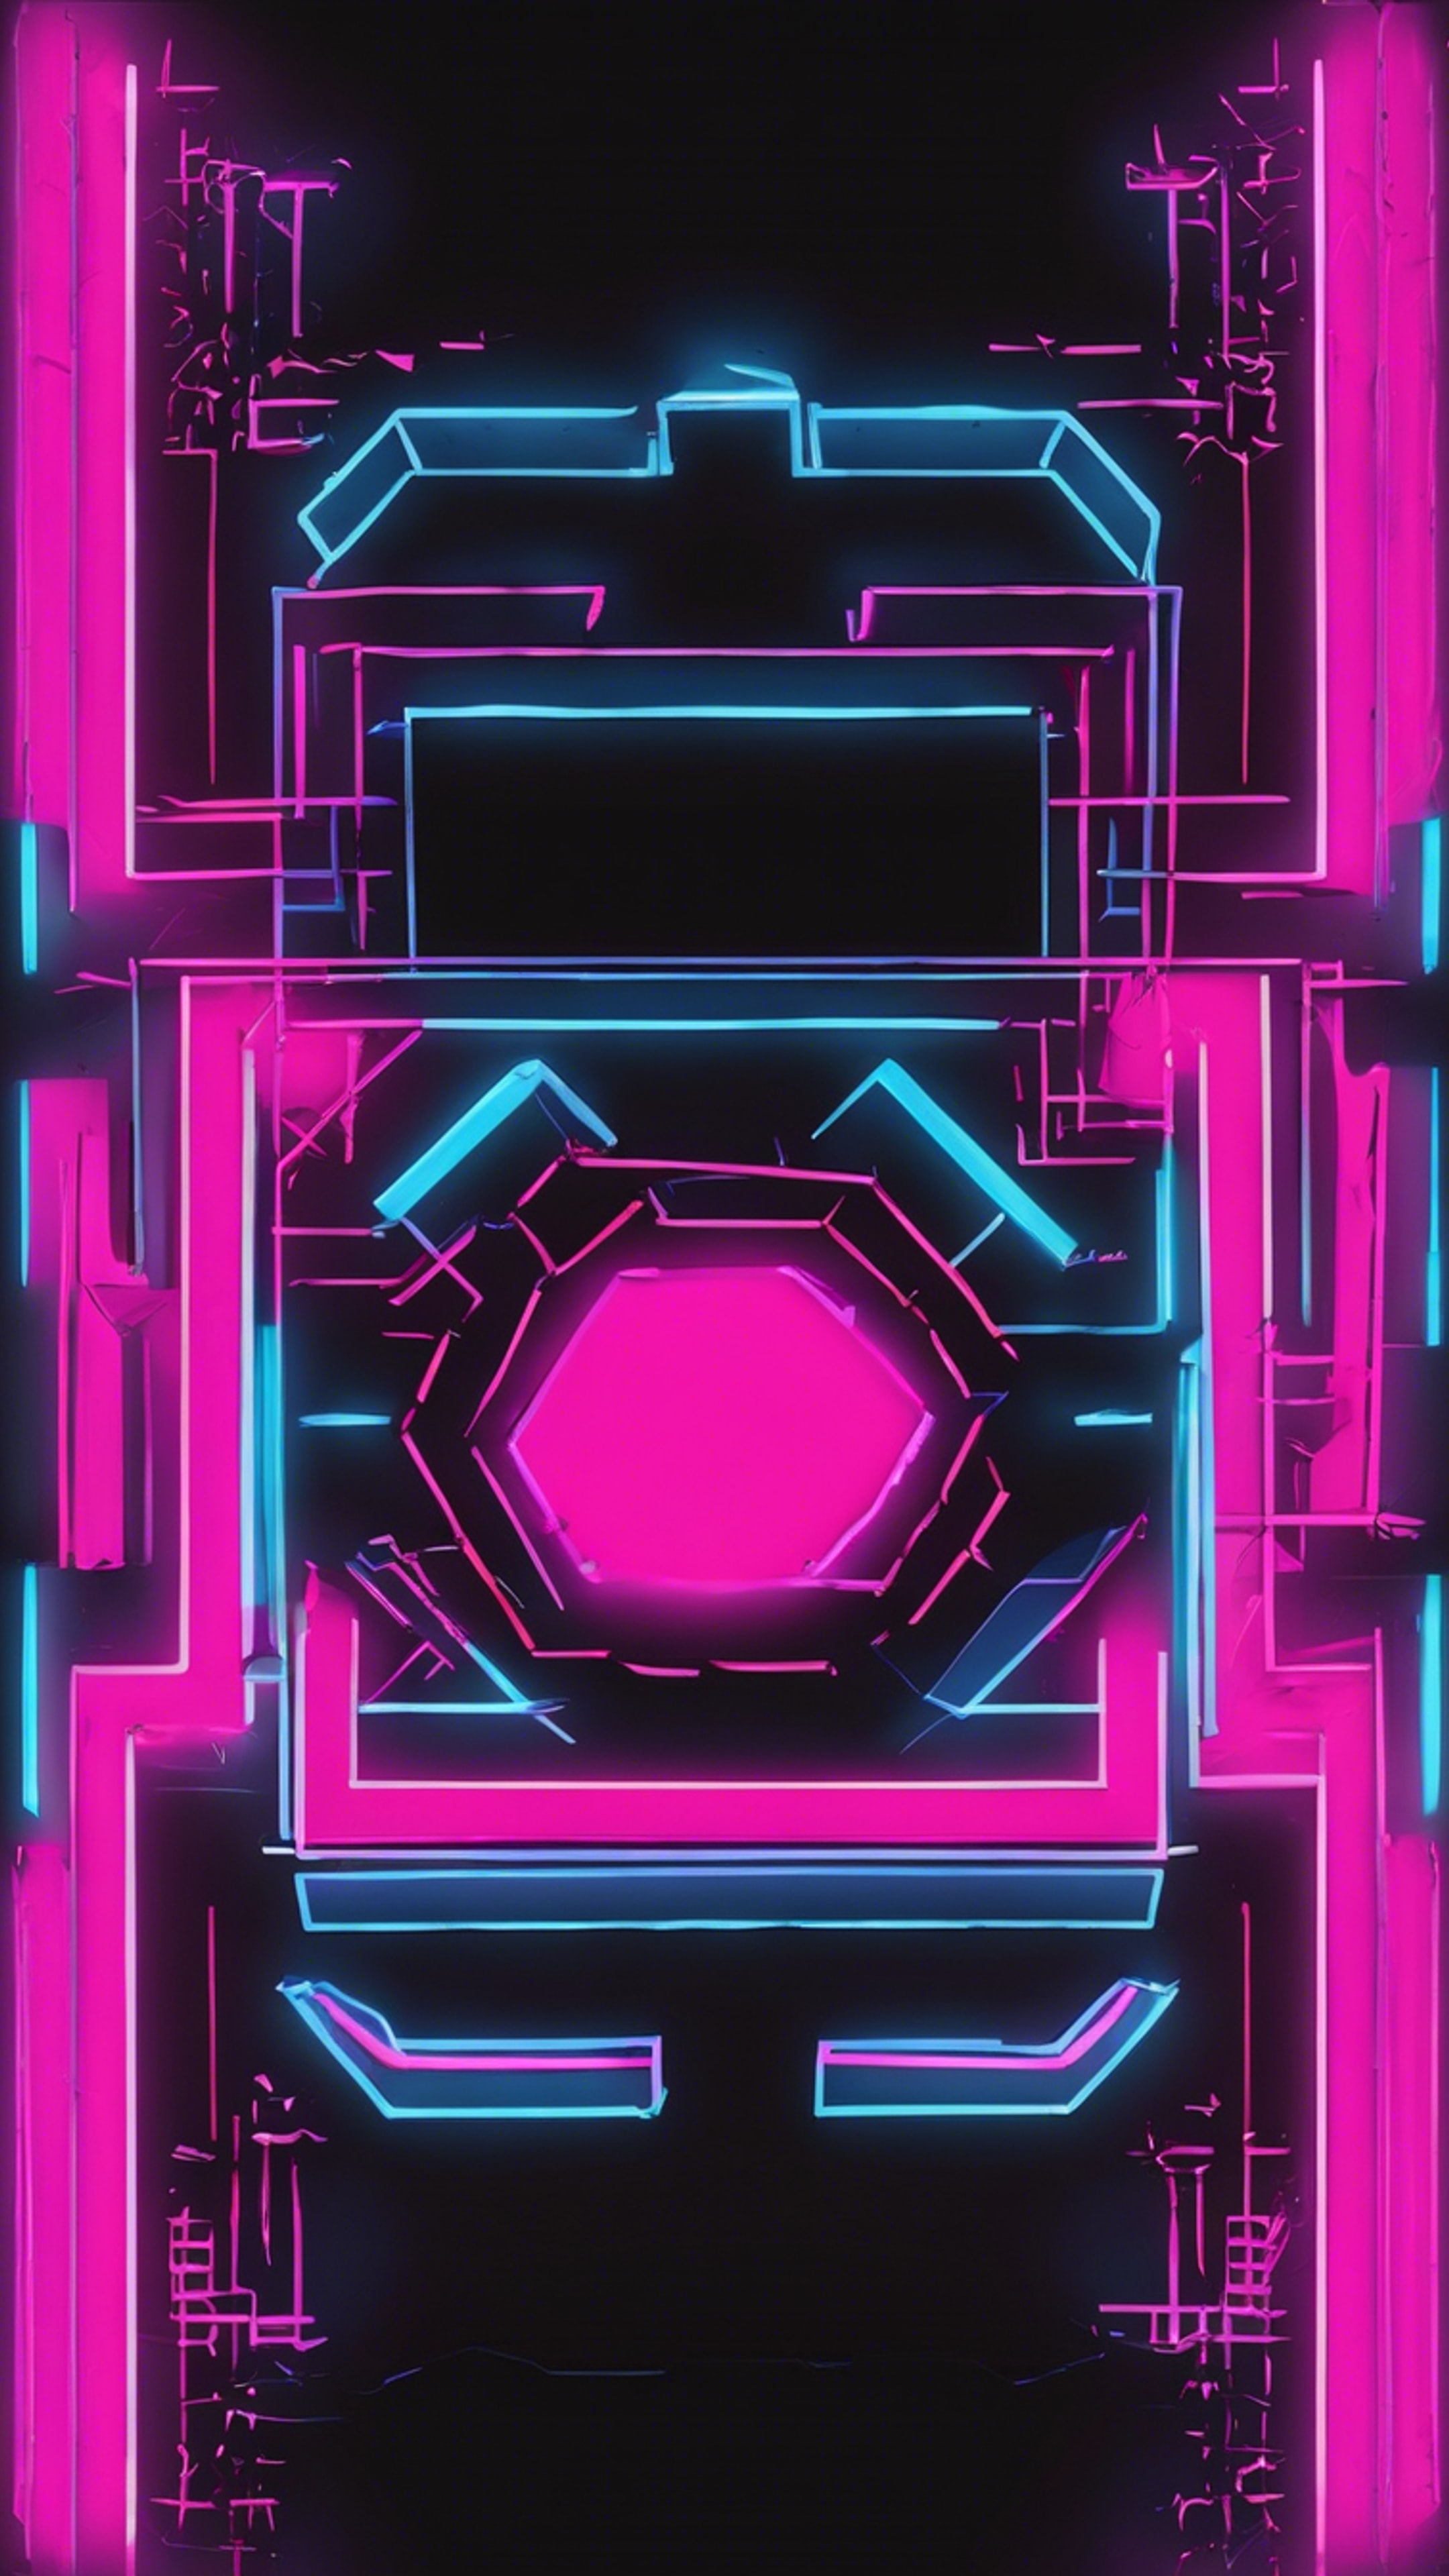 Bright neon pink and blue geometric shapes against a black background, reminiscent of 80s arcade games. Hình nền[dd42a0f55e3e425295c8]